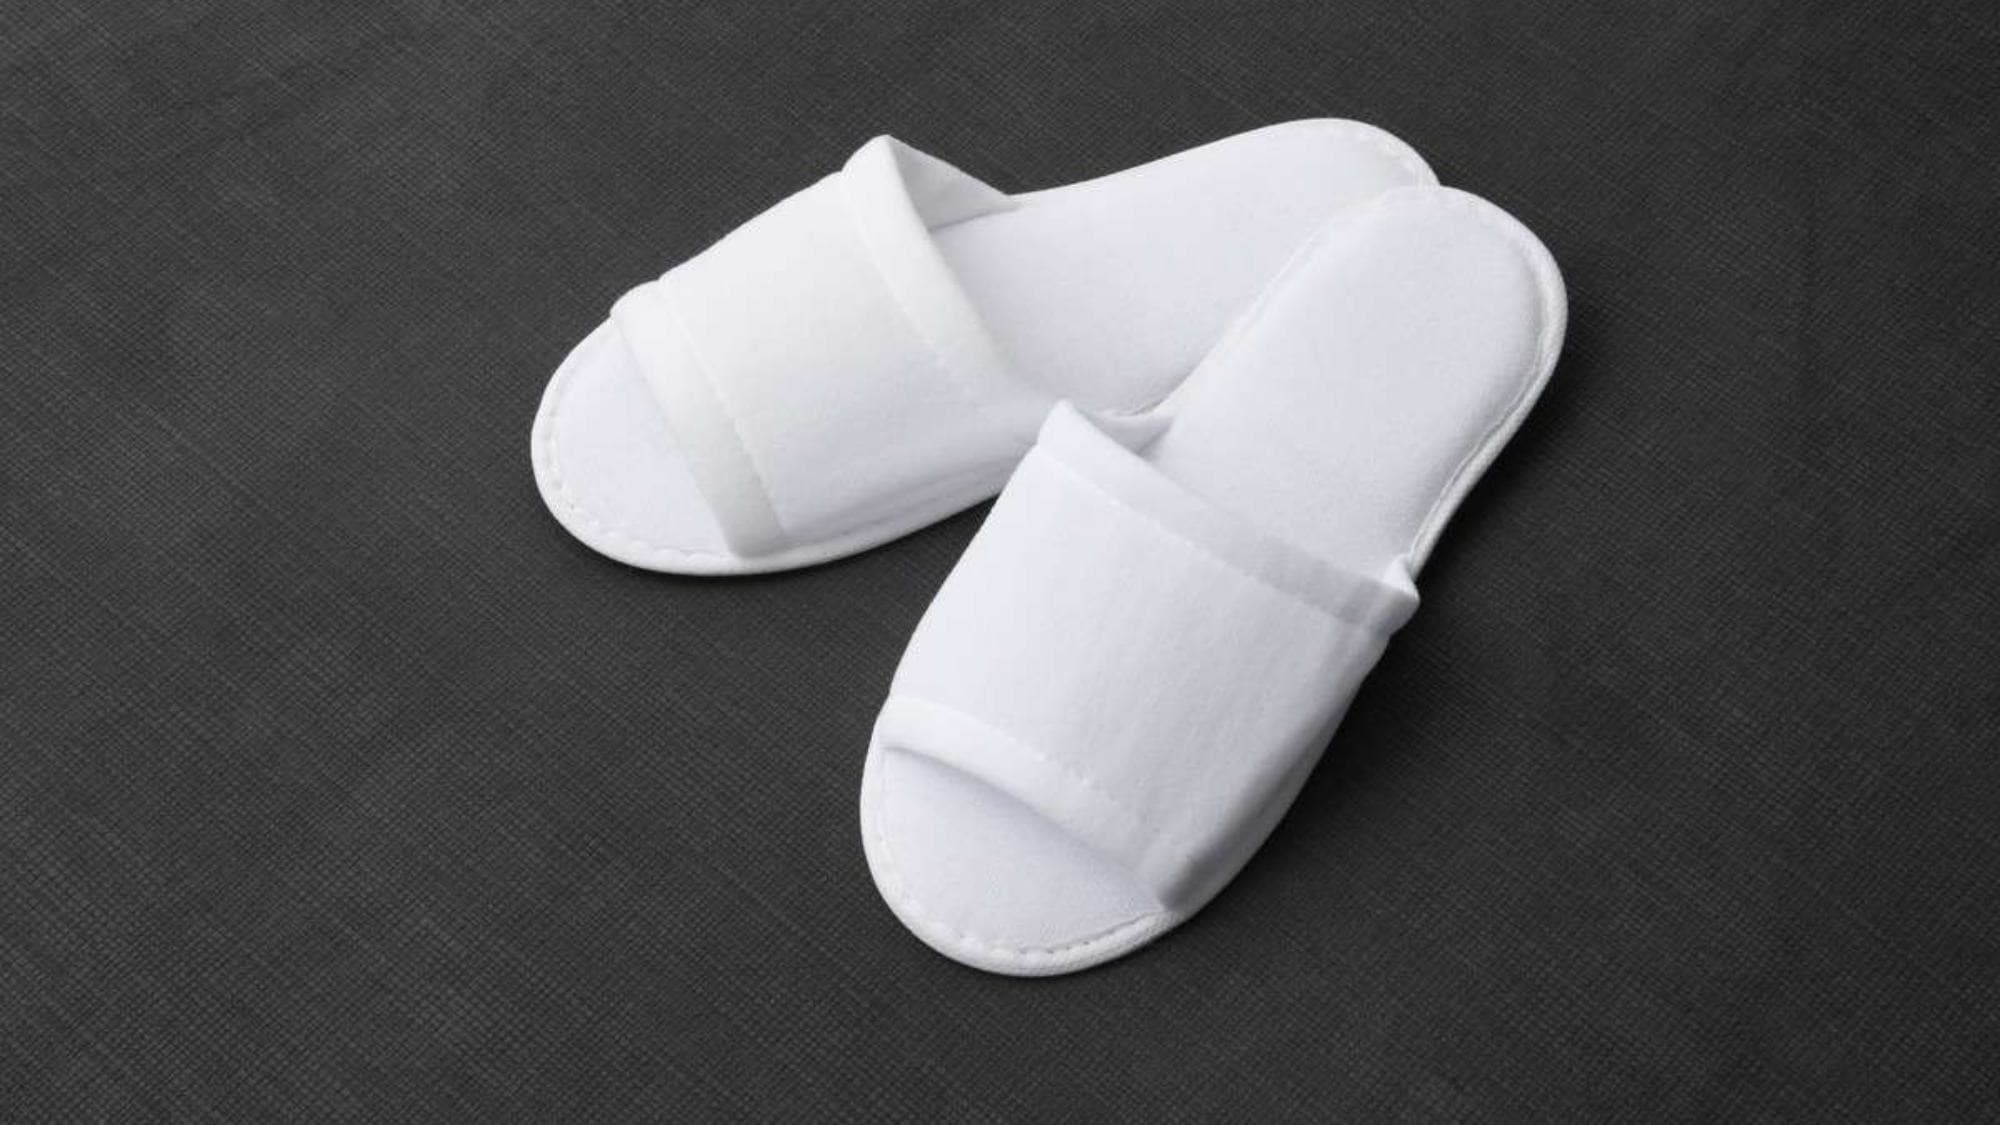 Amenities: Clean disposable slippers